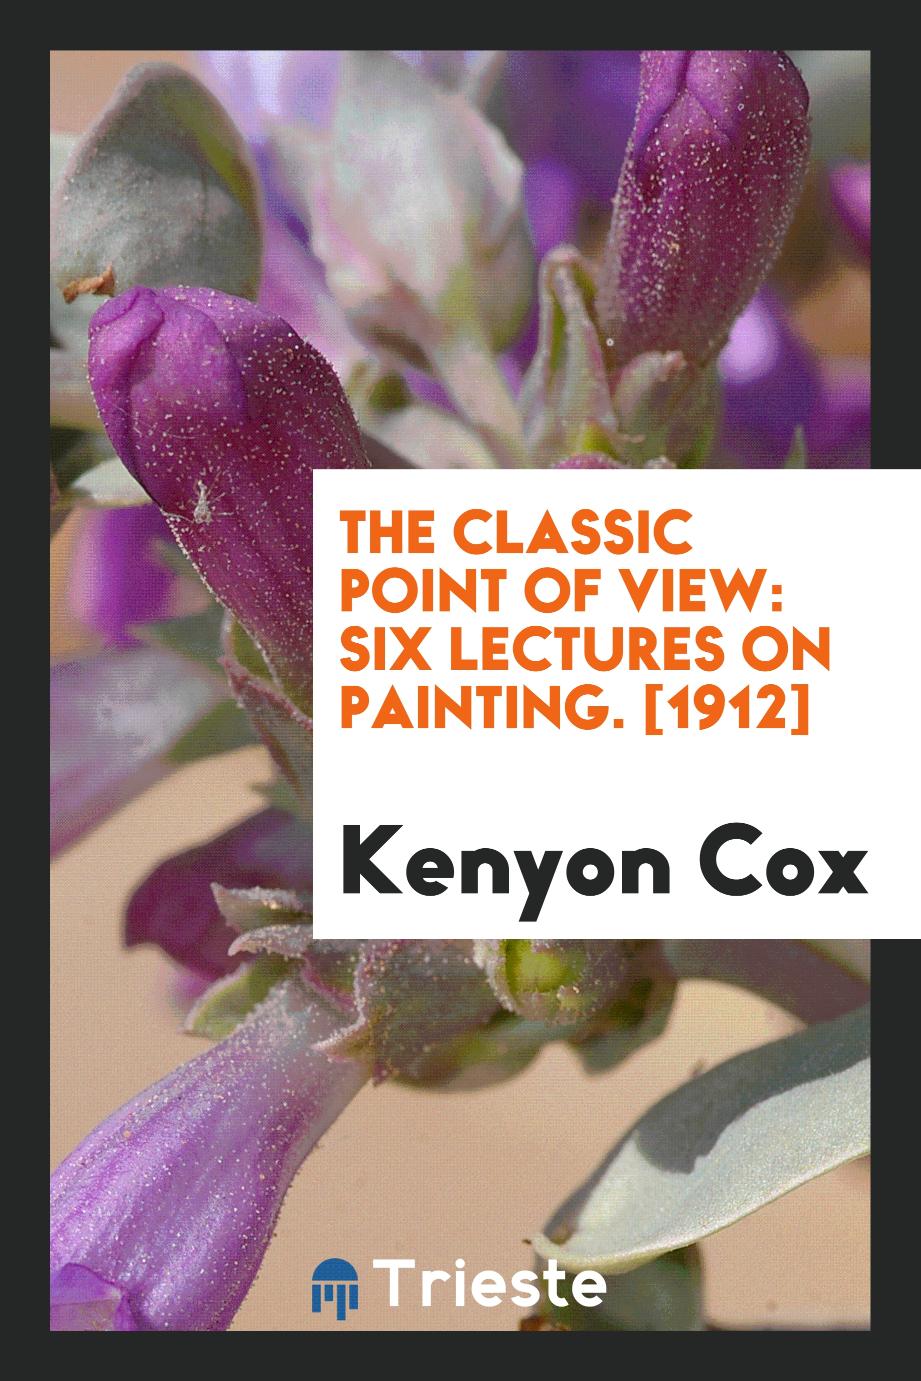 The Classic Point of View: Six Lectures on Painting. [1912]